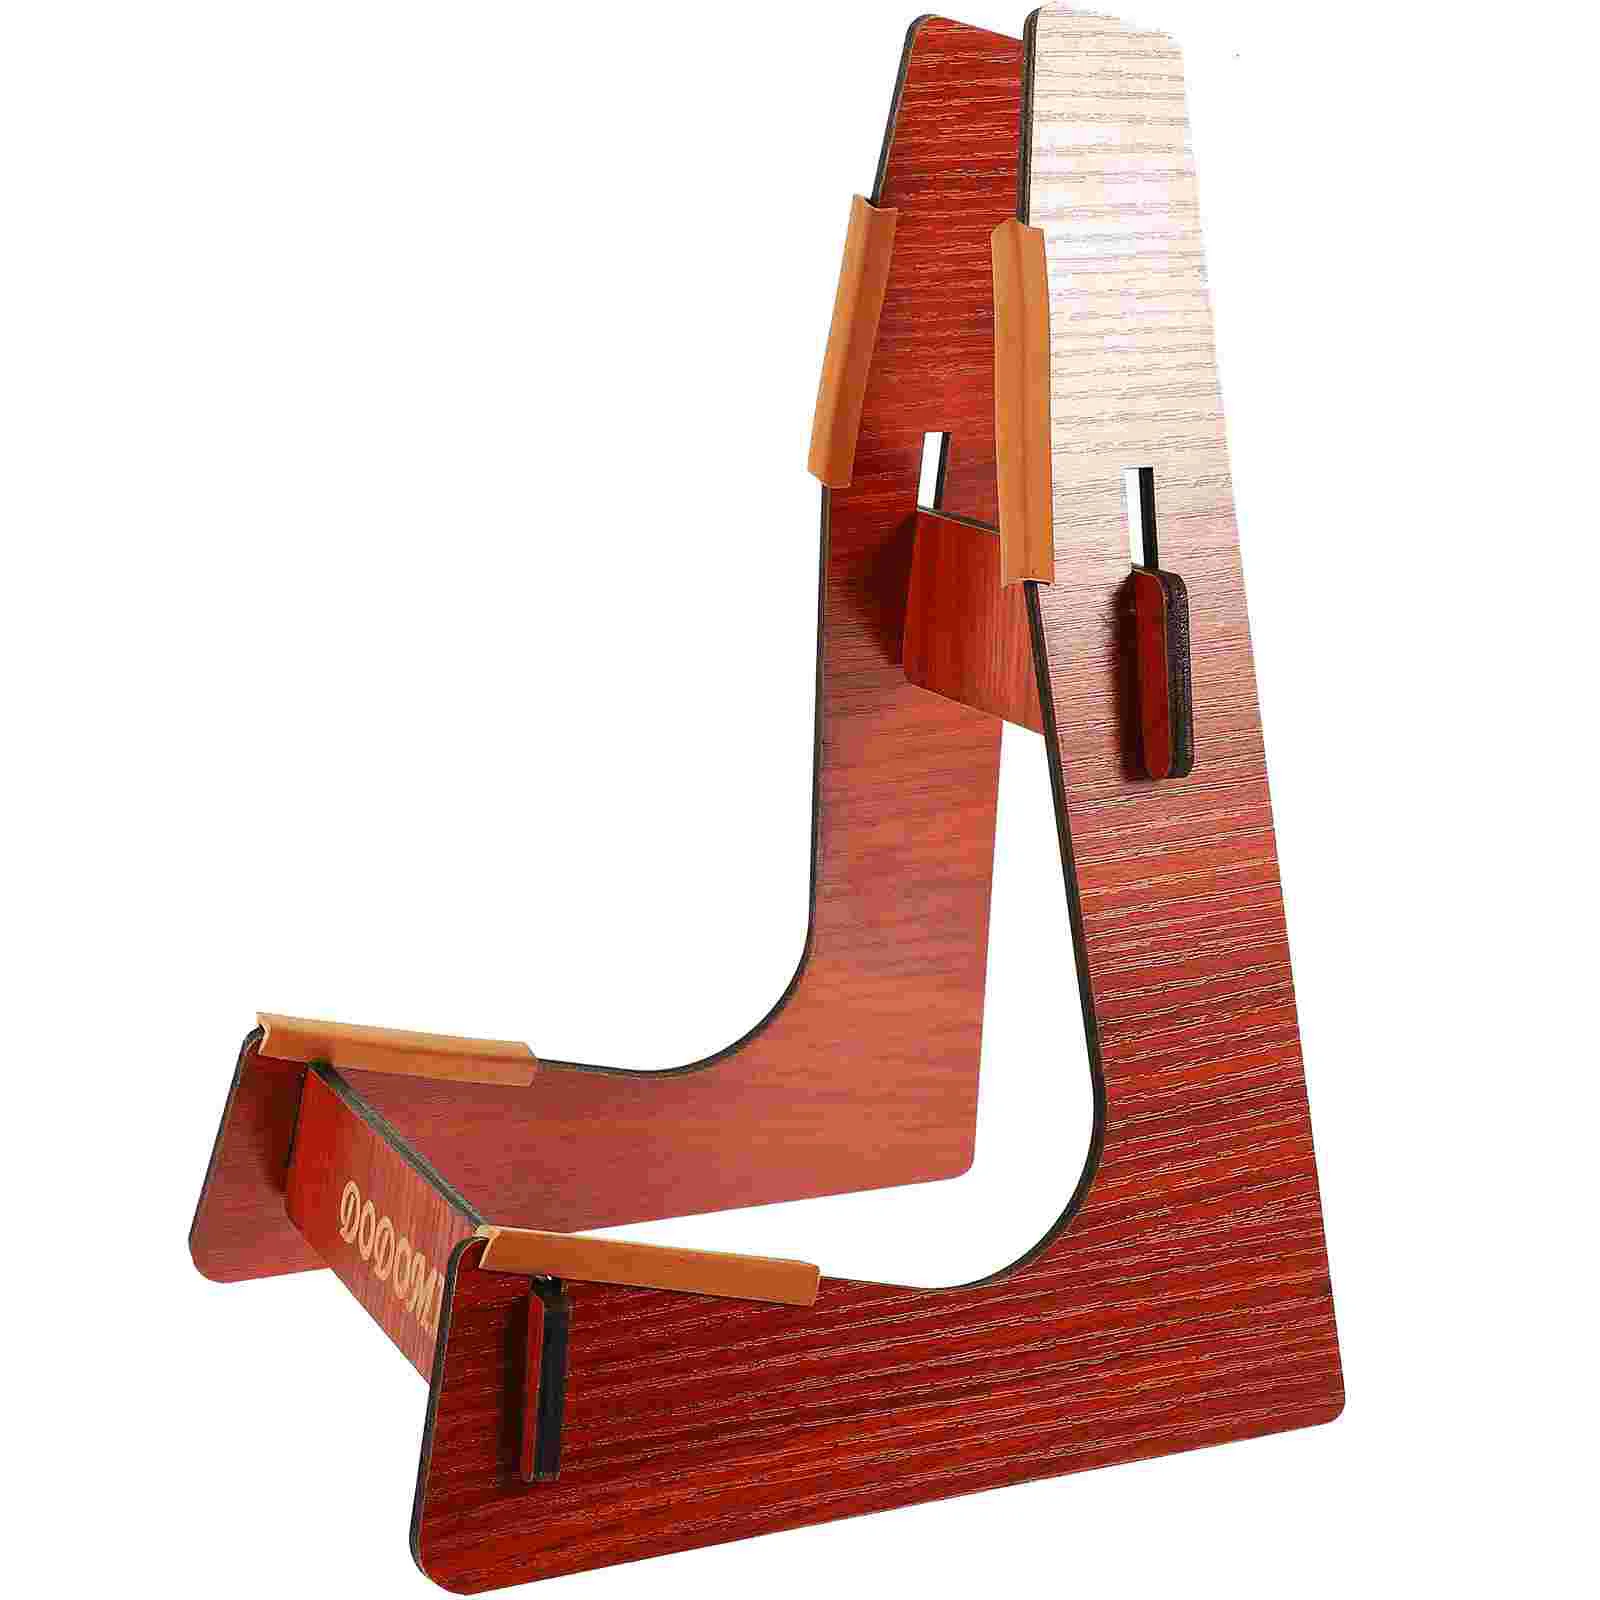 Wood Guitar Stand Violin Accessories Ukeleles Stand Holder Foldable Guitar Stand Floor Stand enlarge